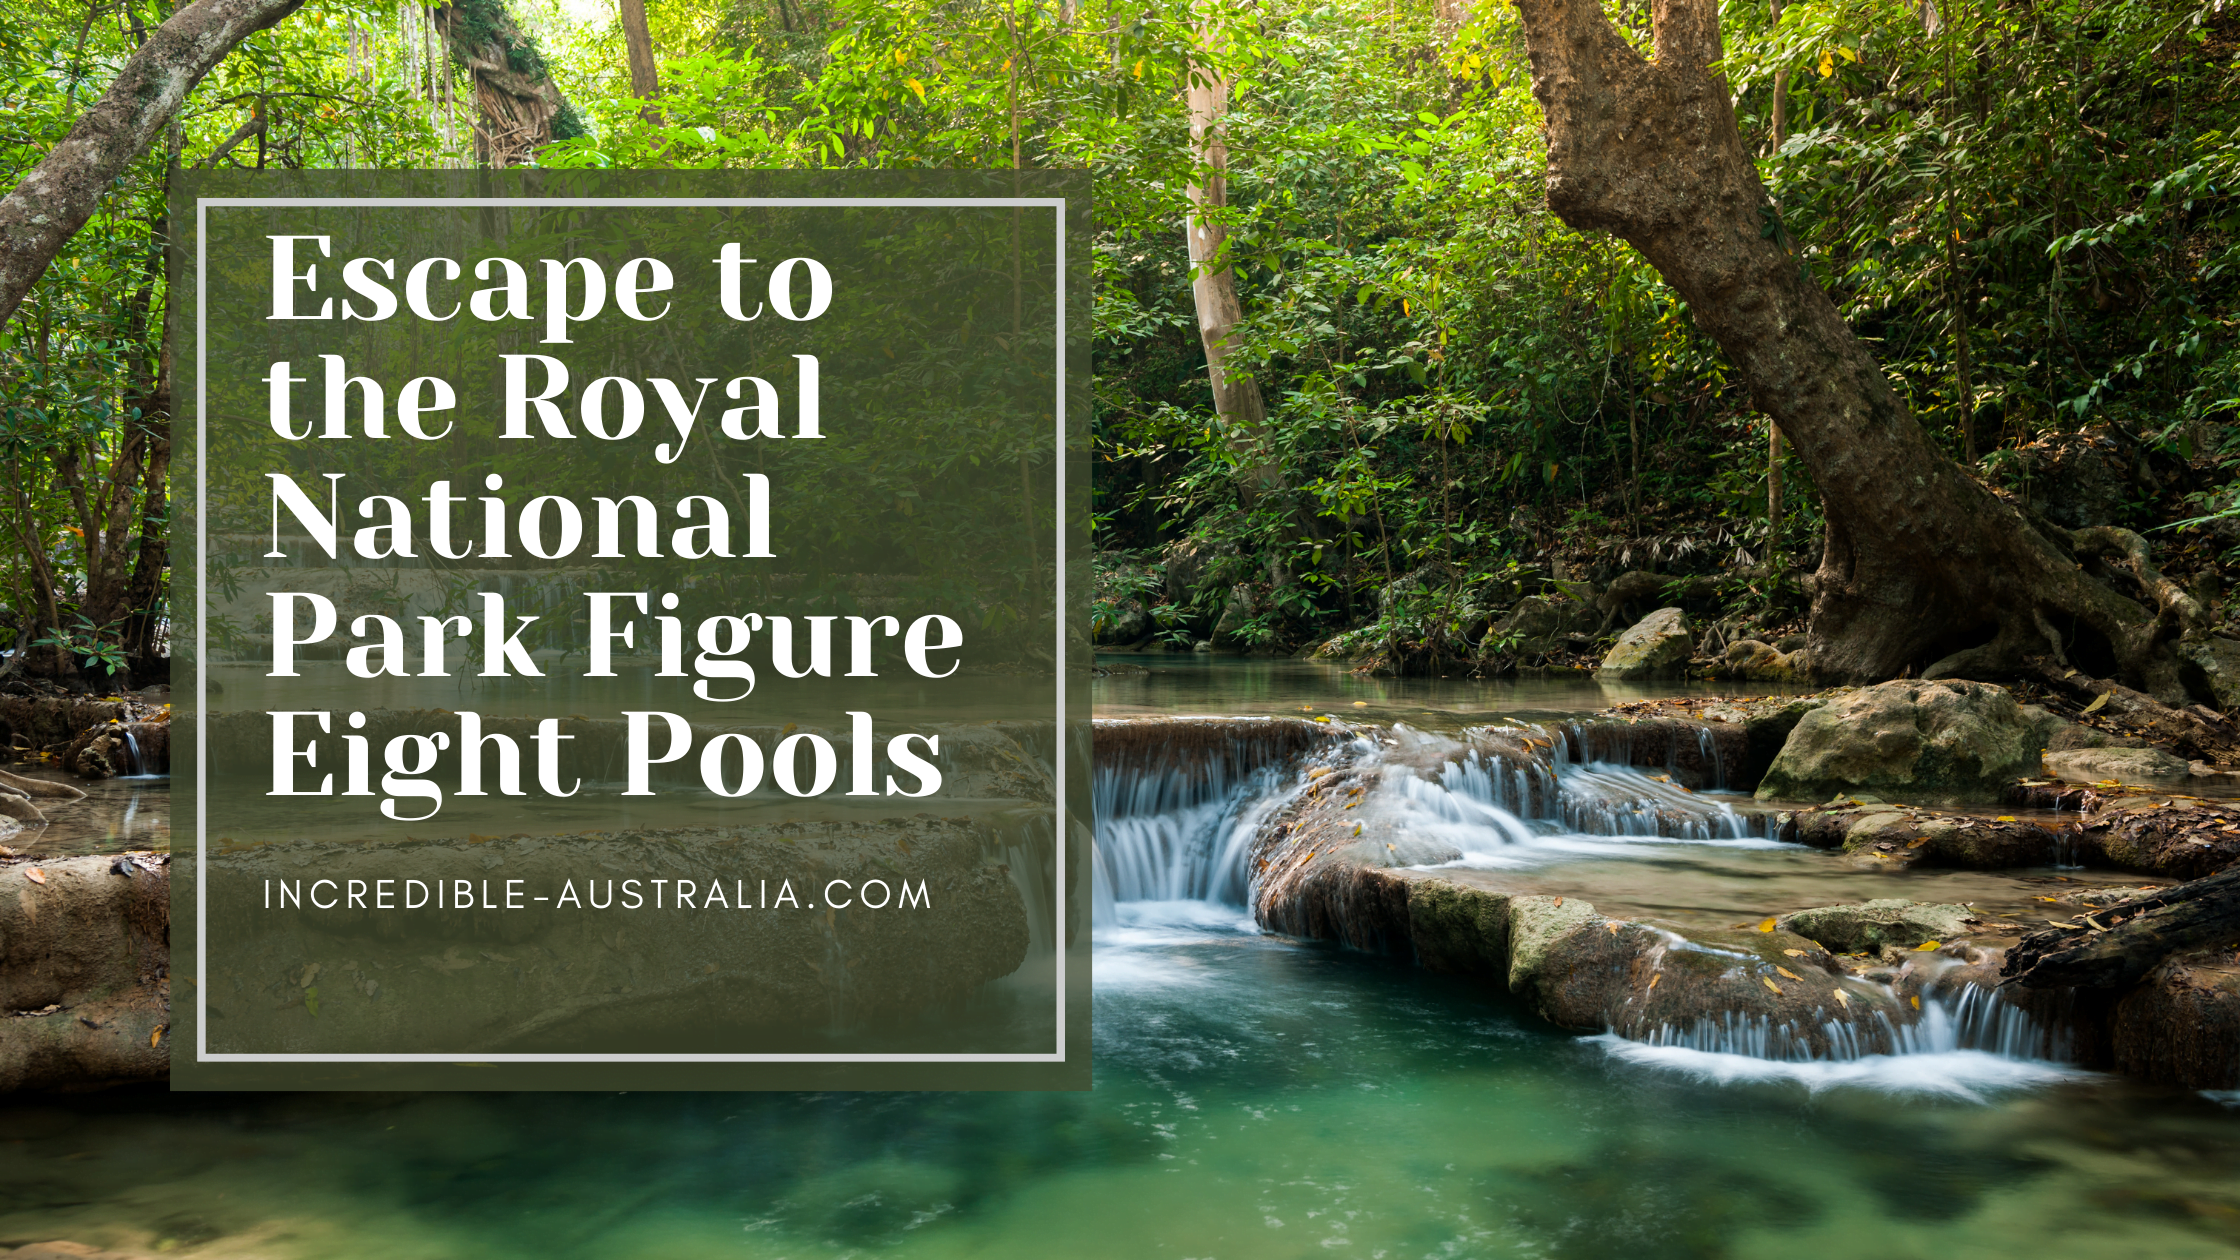 Escape to the Royal National Park Figure Eight Pools